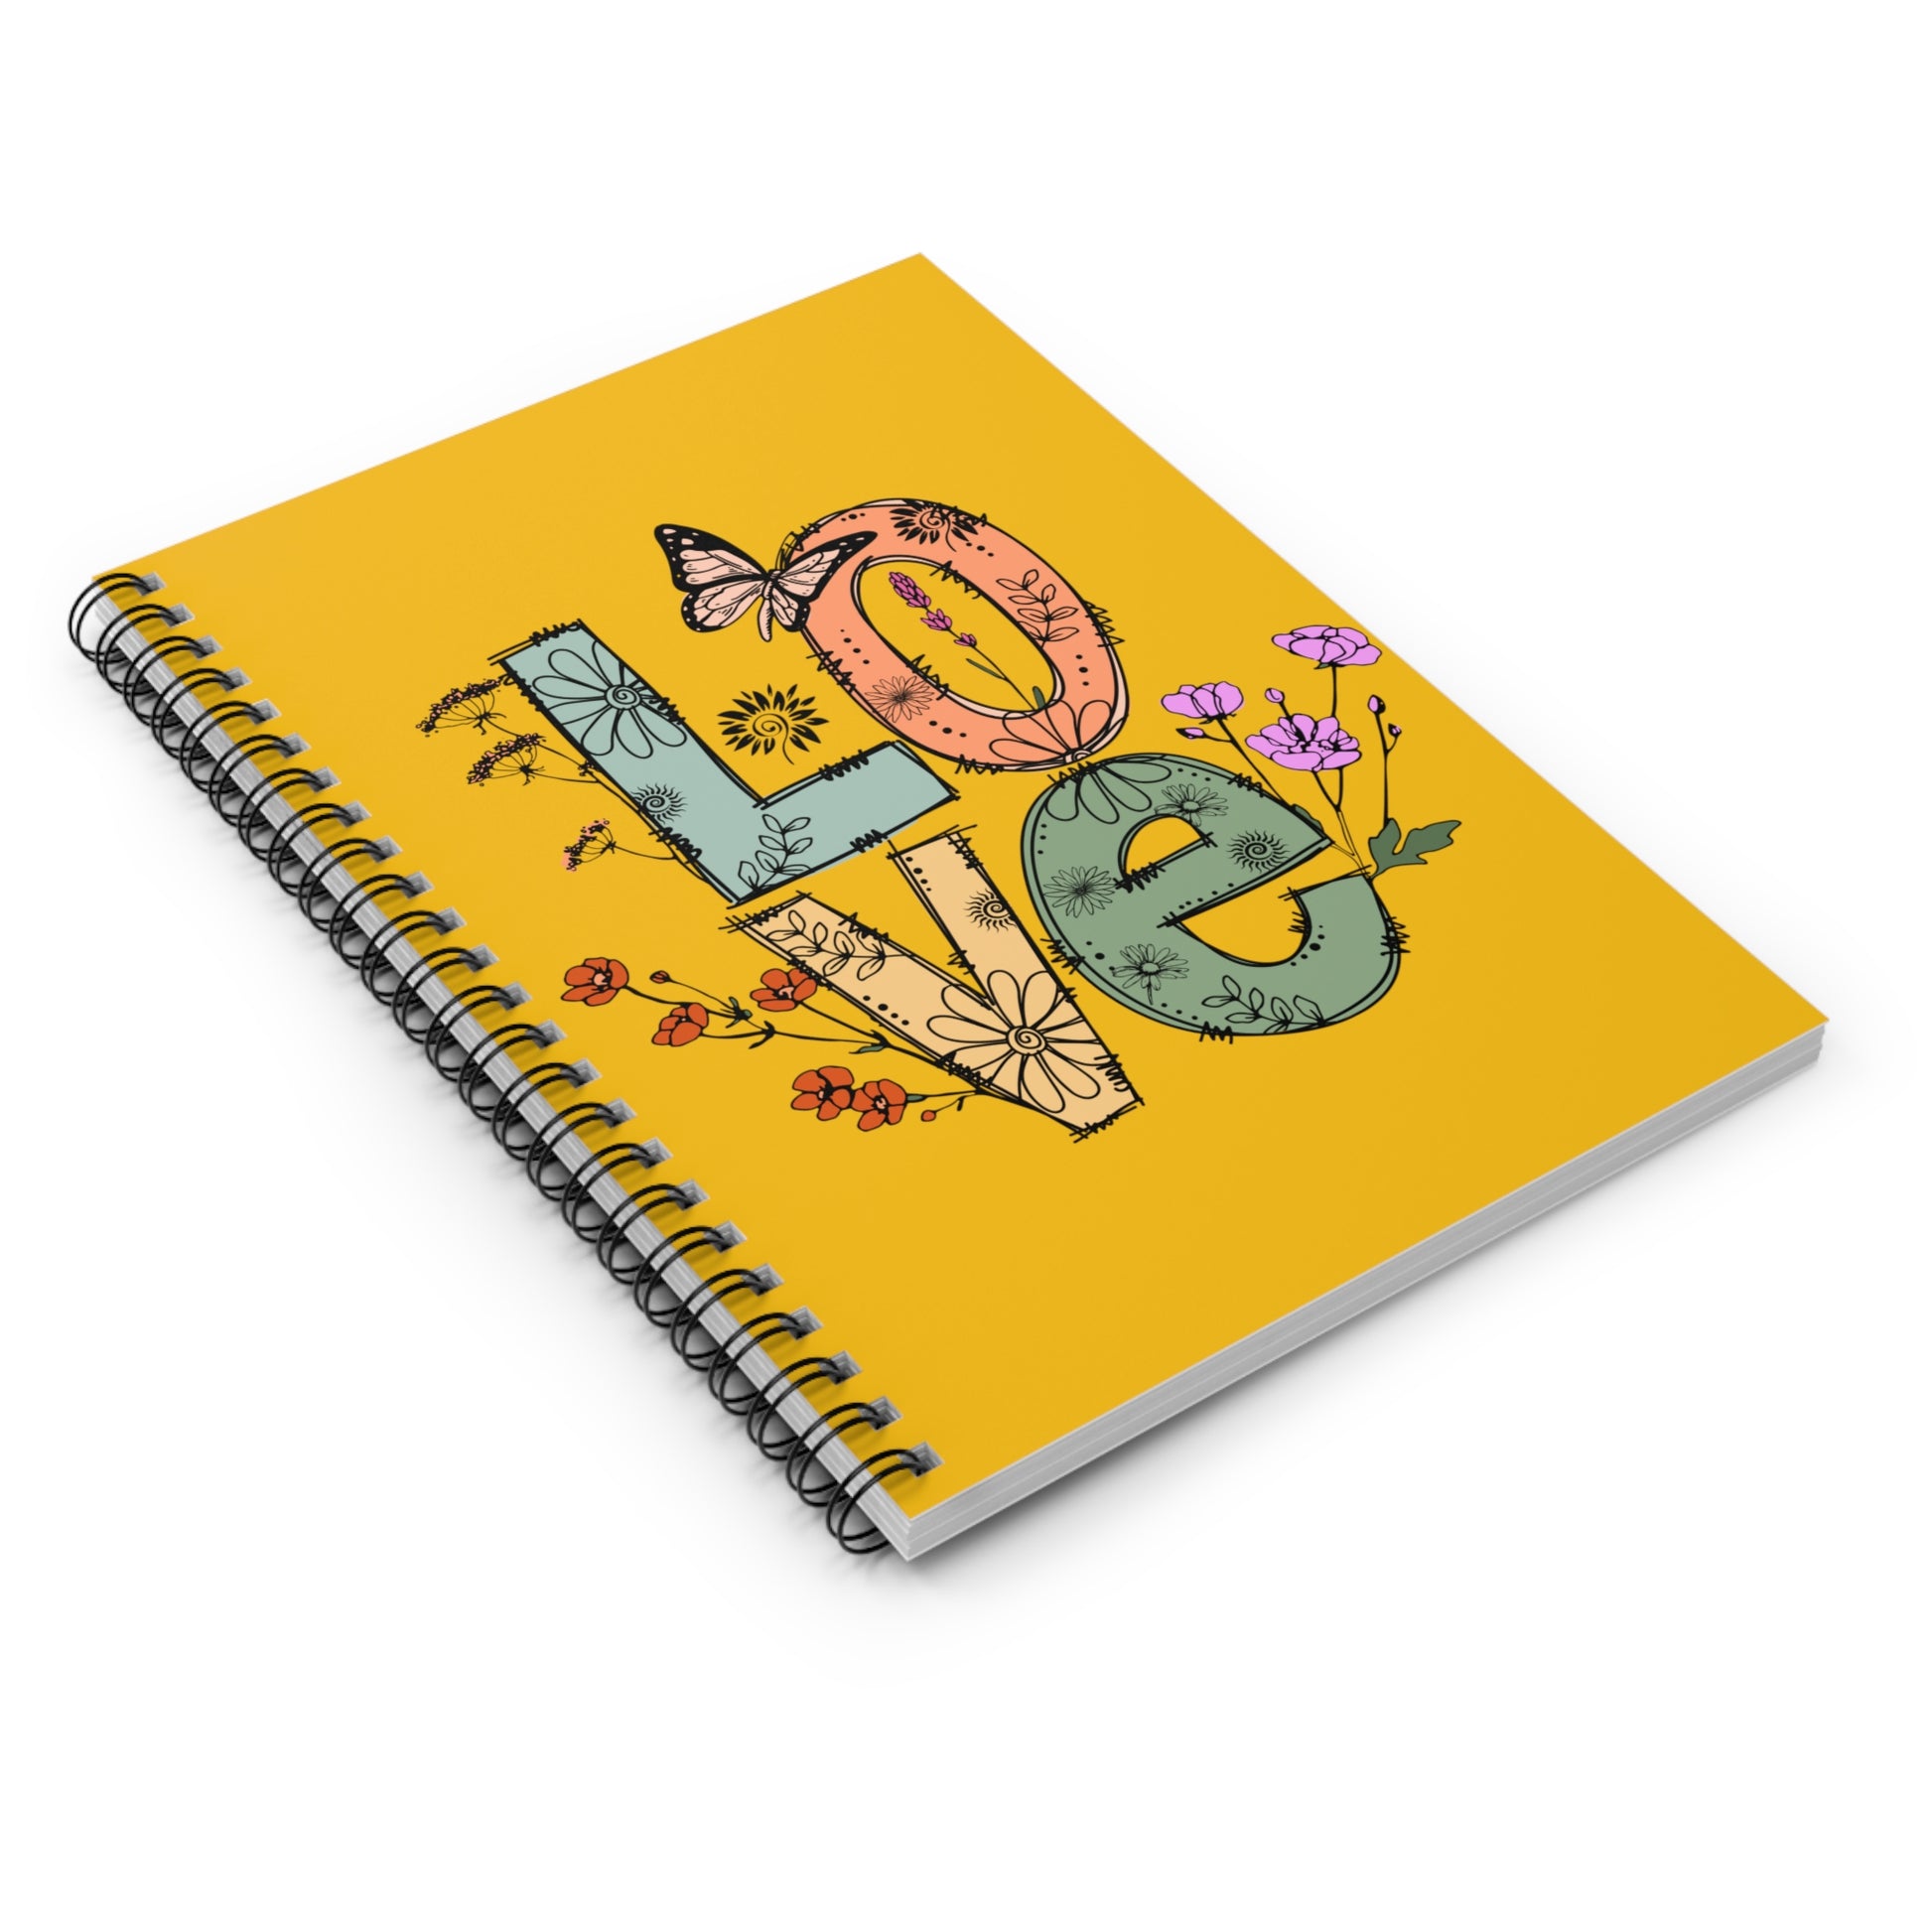 LOVE Flower Doodle: Spiral Notebook - Log Books - Journals - Diaries - and More Custom Printed by TheGlassyLass